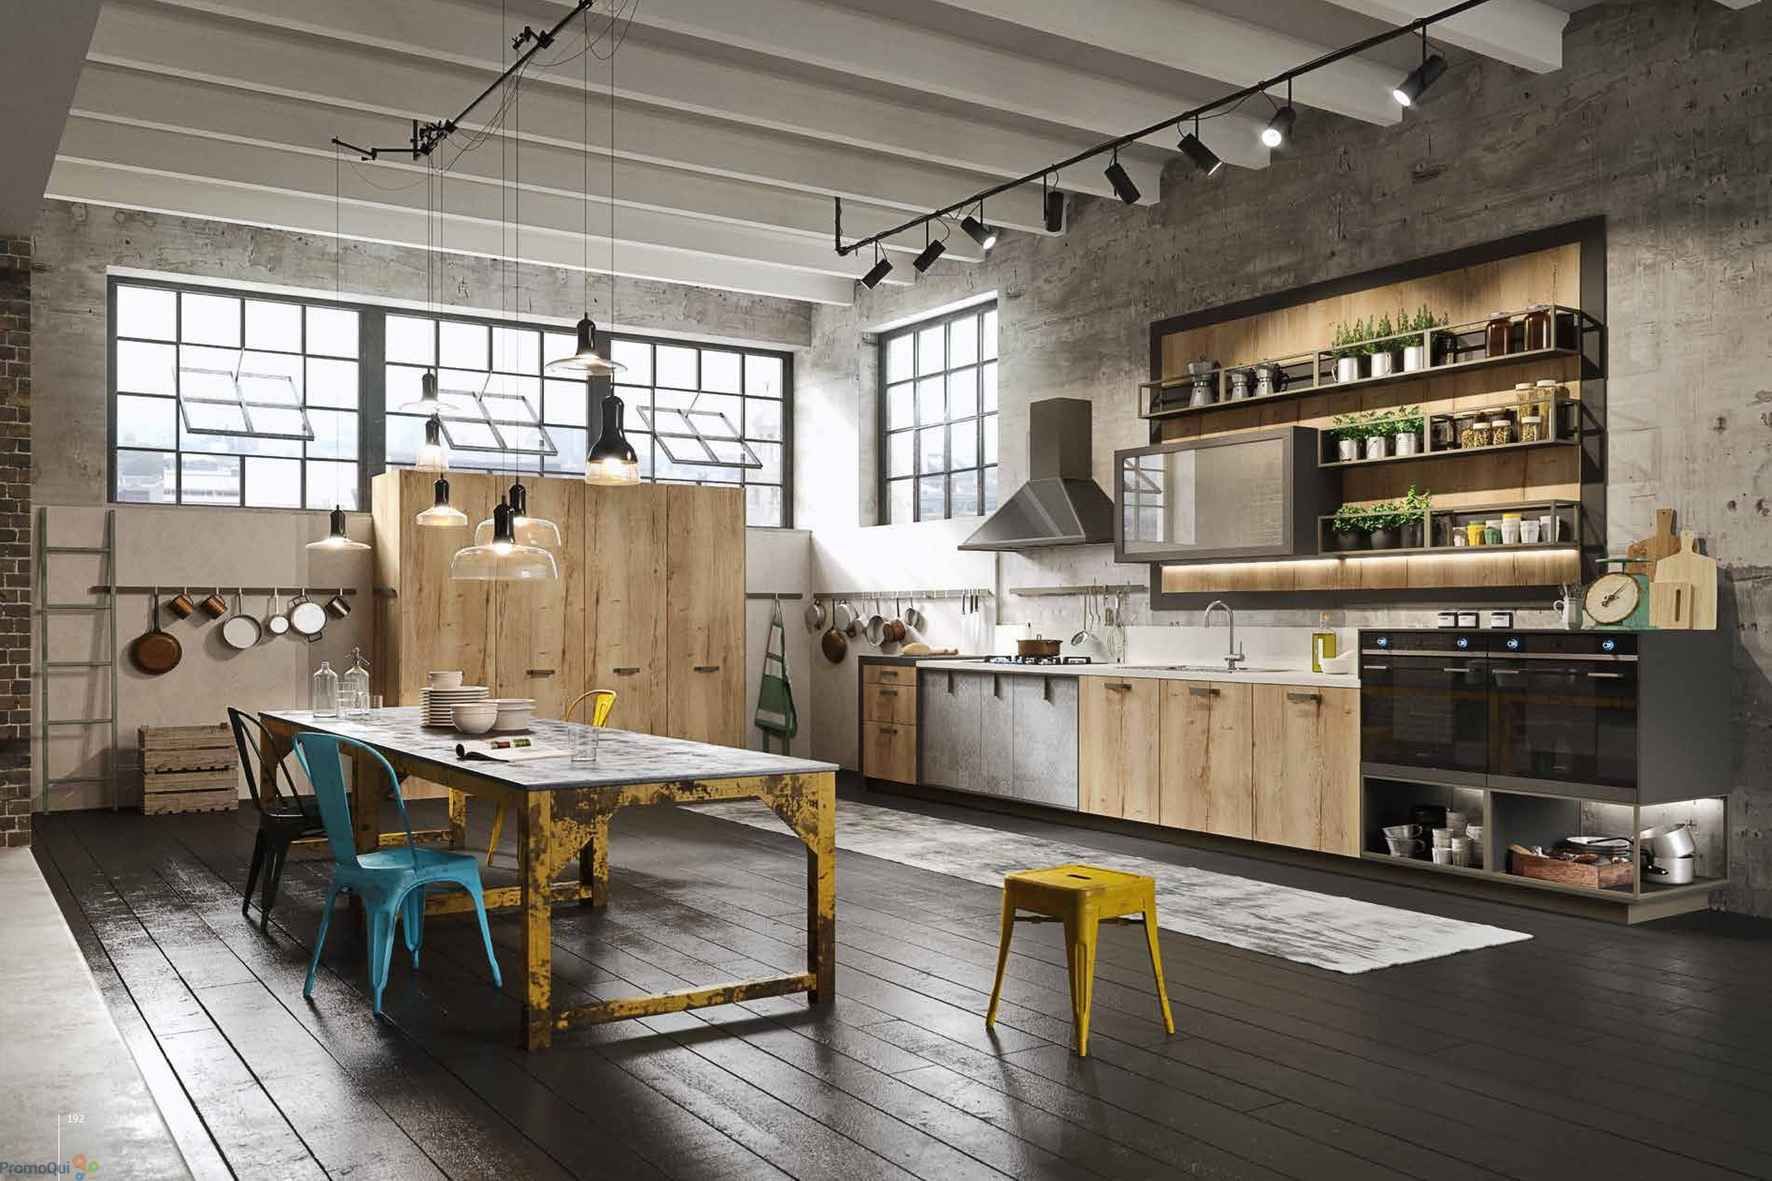 Industrial Kitchen Design: 10 Inspiring Ideas For A Chic And Modern Space